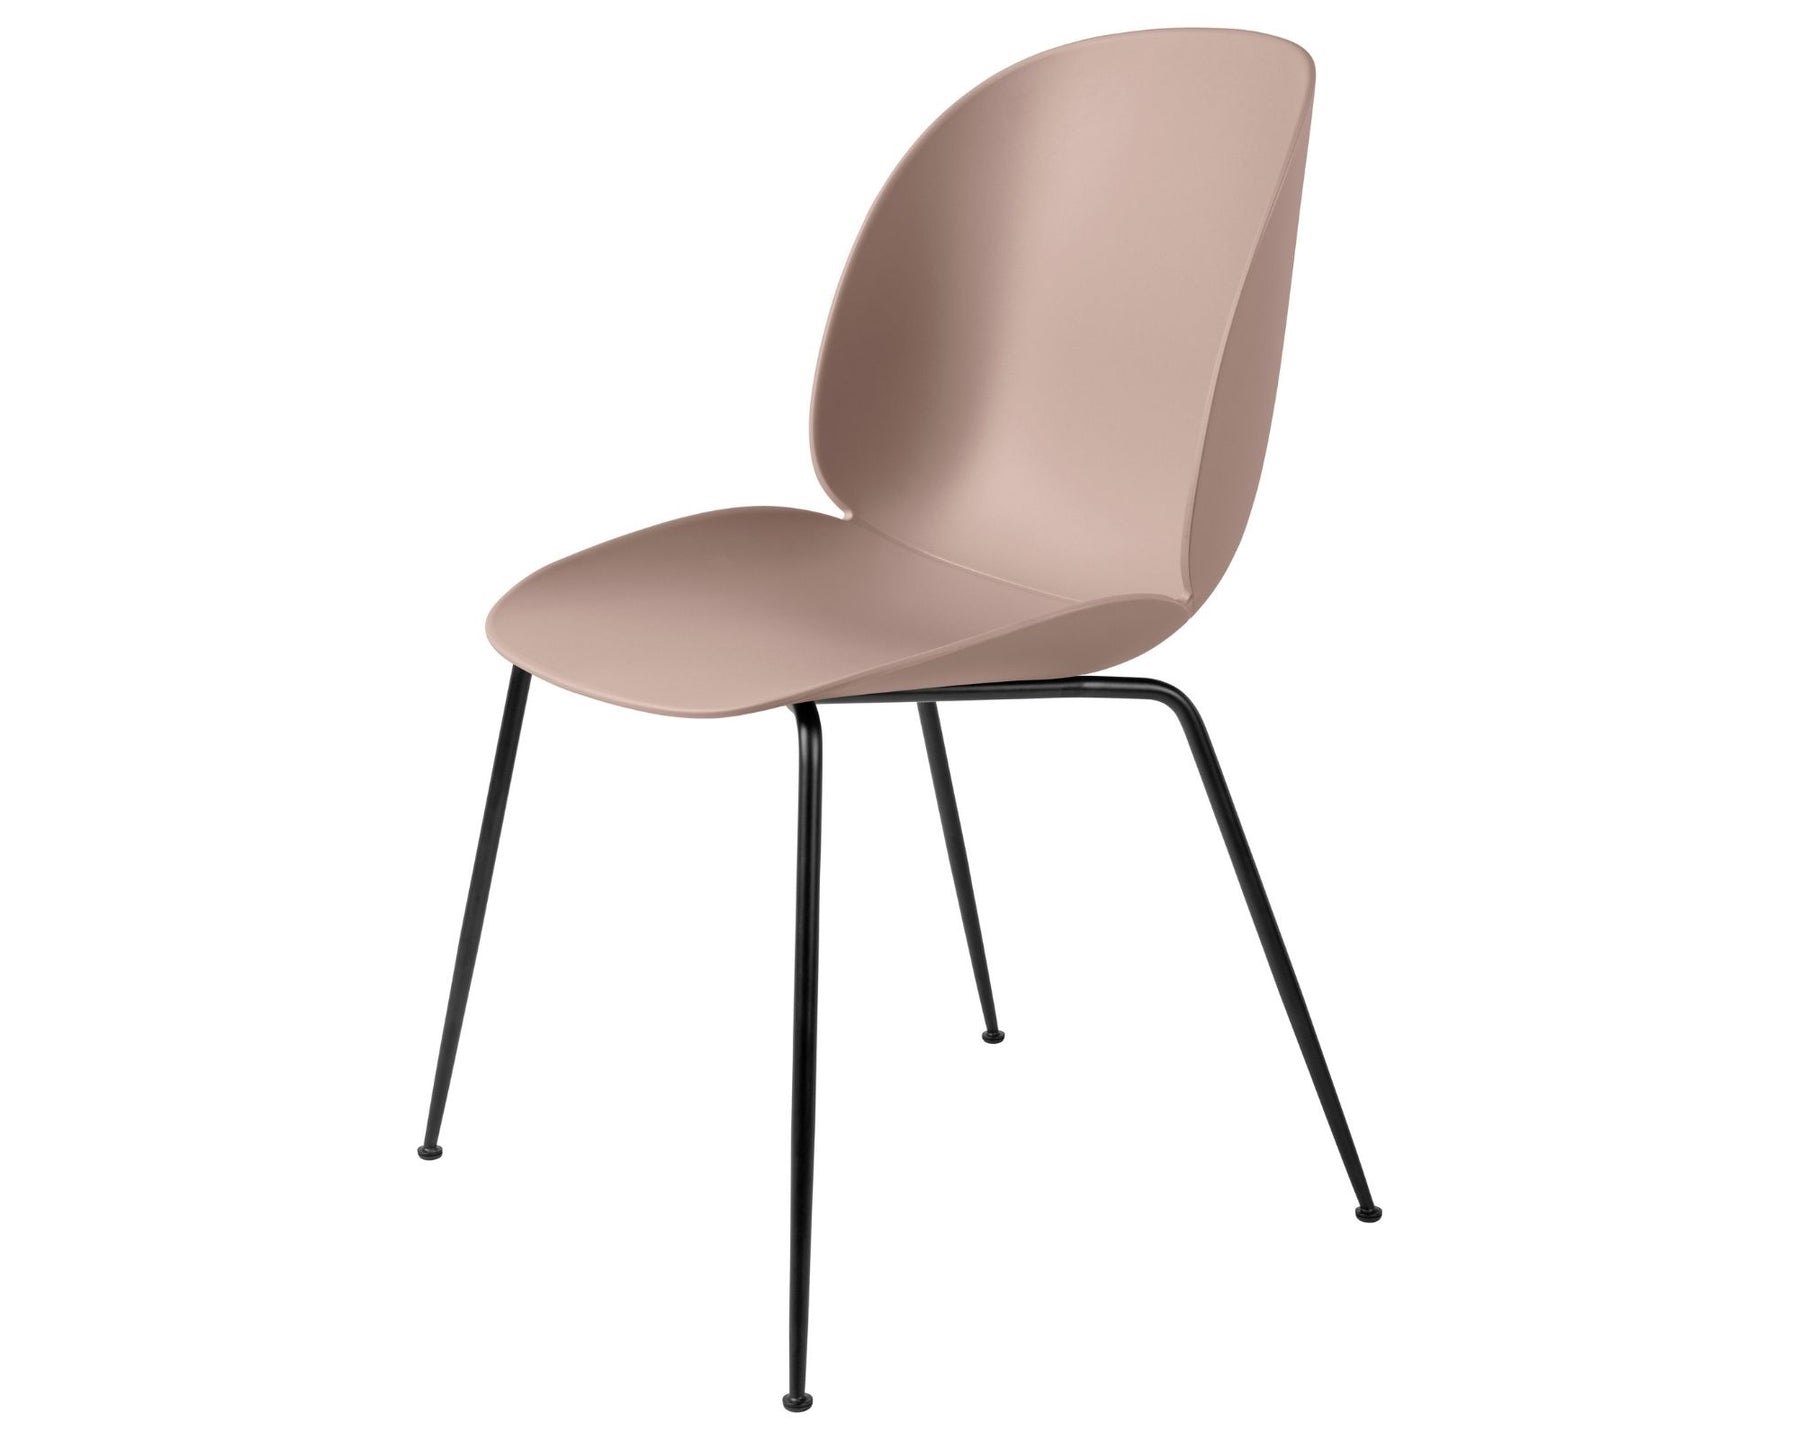 Sweet Pink Dining Chair with Black Base | DSHOP